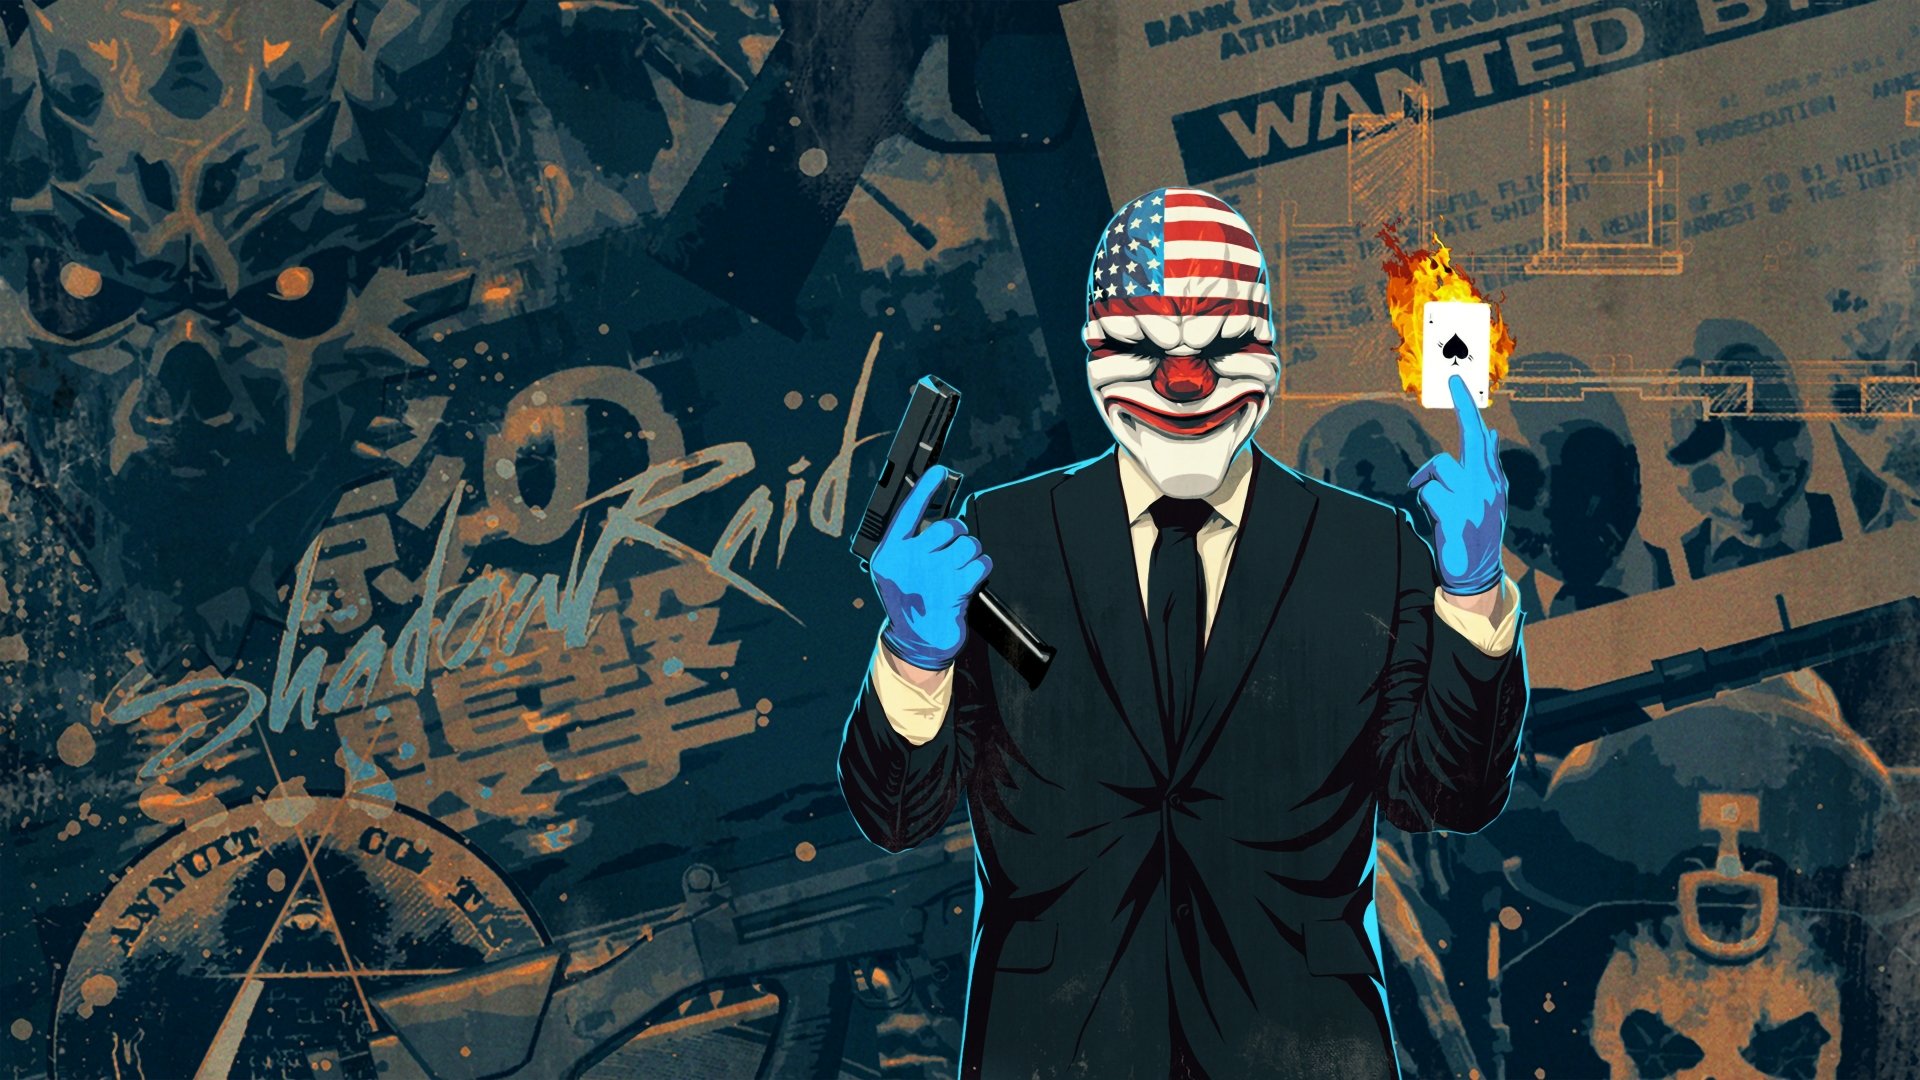 payday 2 pc game download free